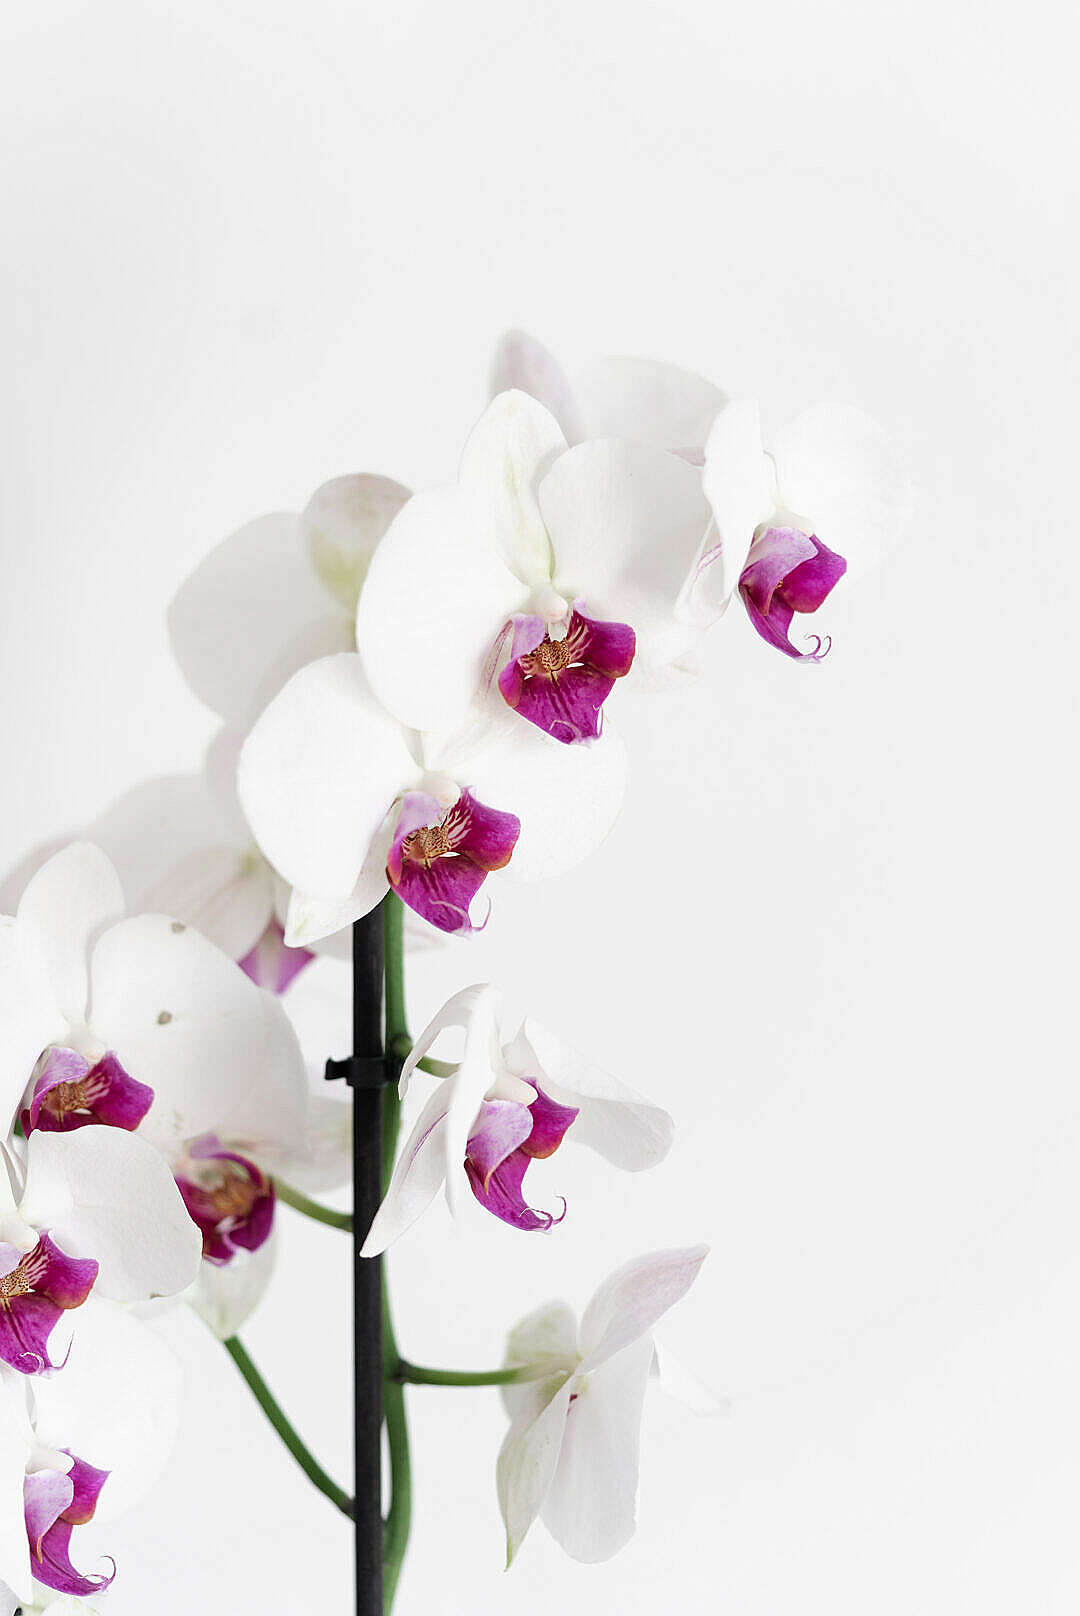 Download White Orchid Flower Close Up FREE Stock Photo